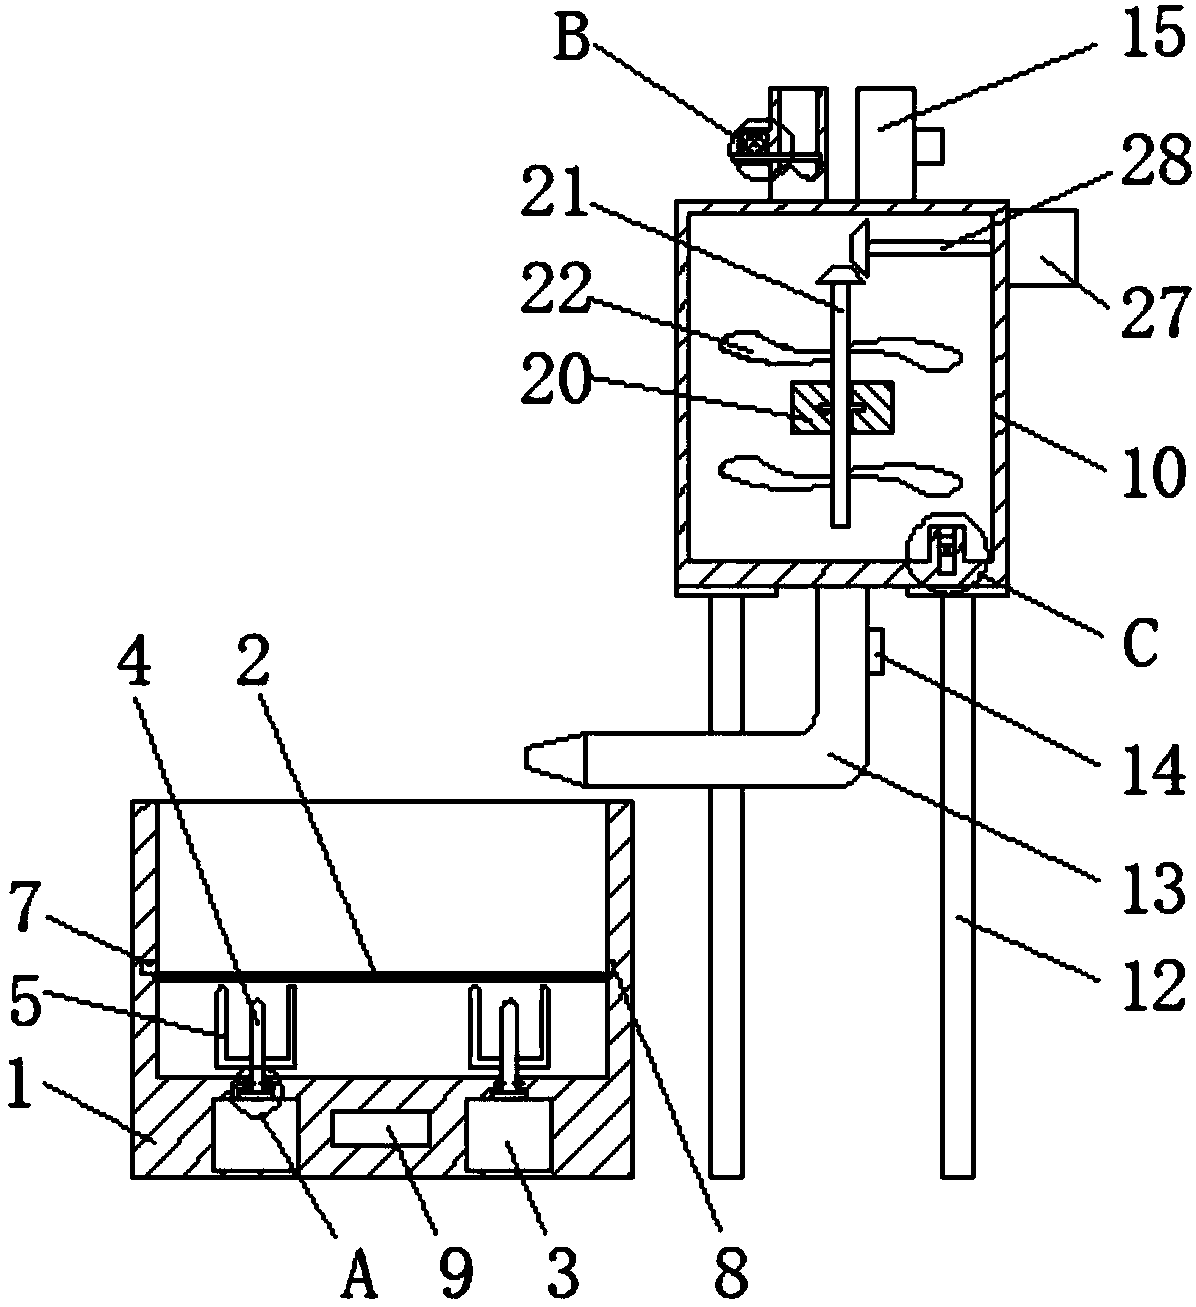 Cattle and sheep feeding device